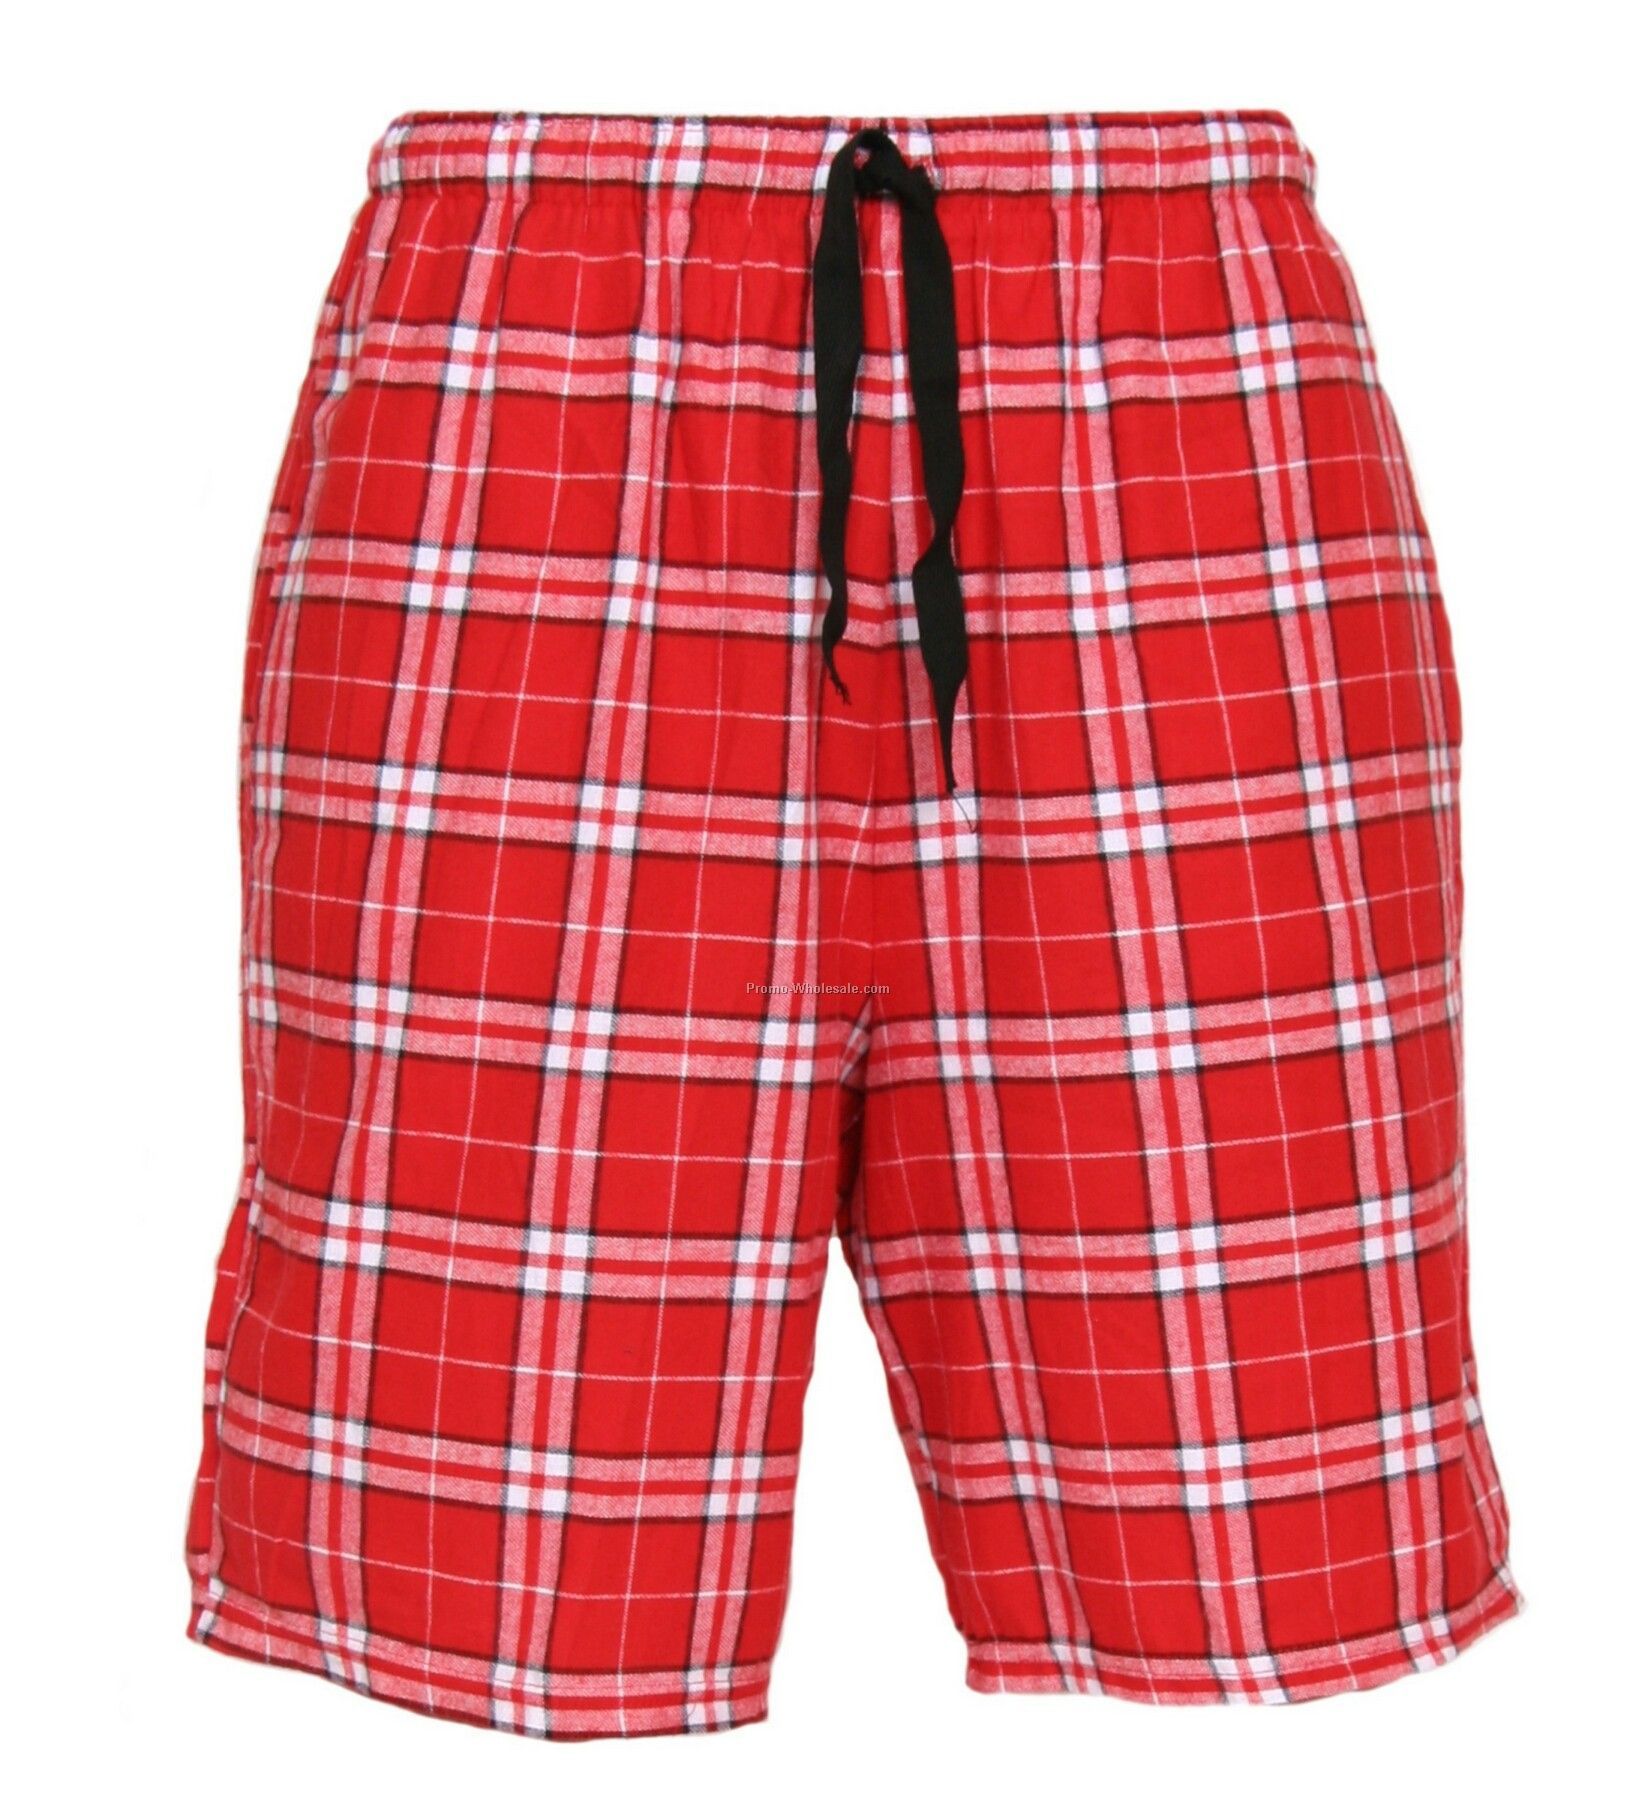 Adults' Red Flannel Dorm Shorts (2xl)